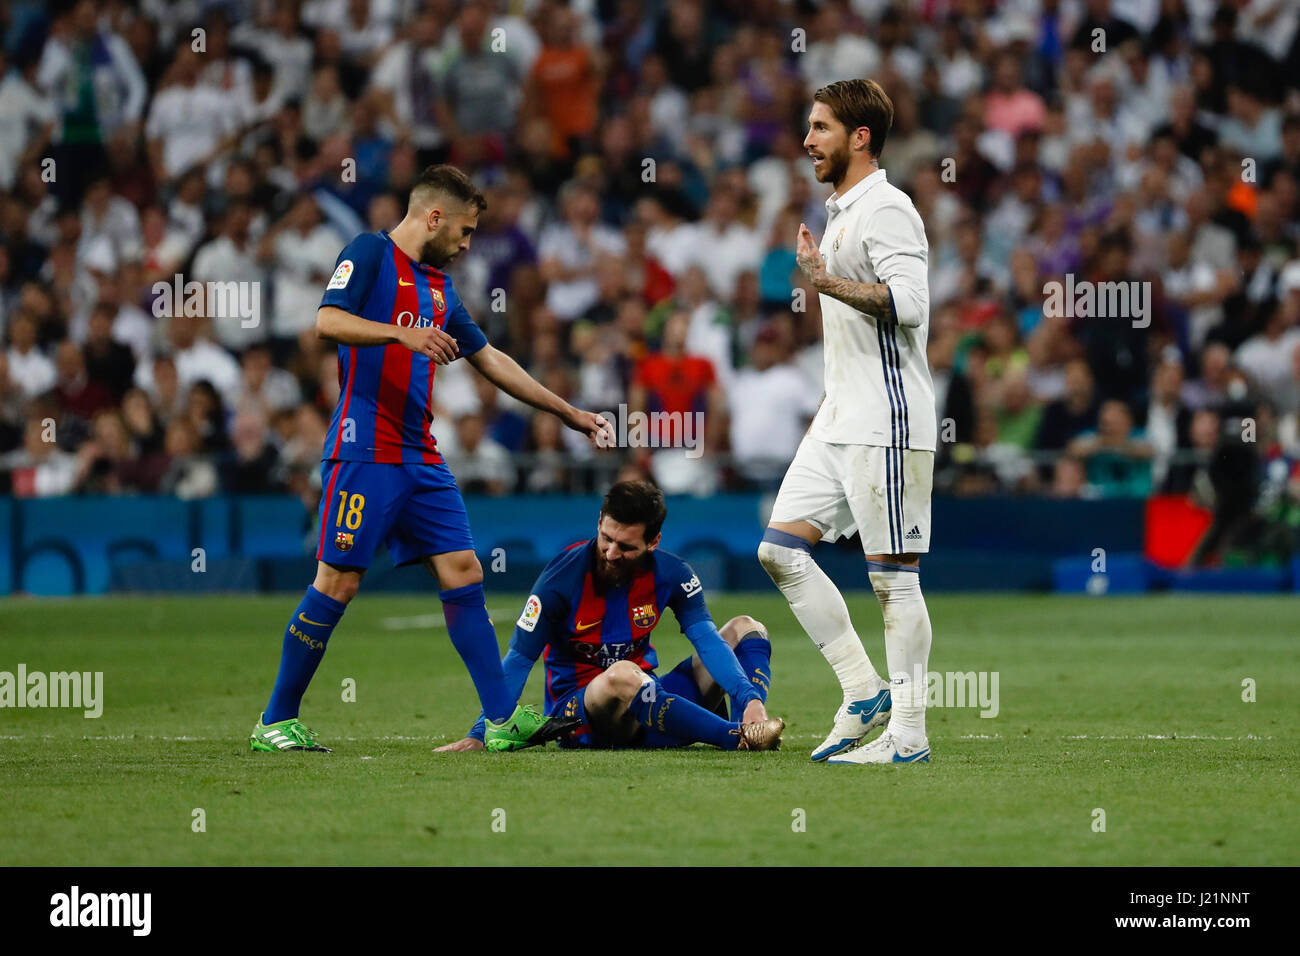 Cristiano Ronaldo dos Santos (7) Real Madrid's player receives a red card Lionel Andres Messi (10) FC Barcelona's player.La Liga between Real Madrid vs FC Barcelona at the Santiago Bernabeu stadium in Madrid, Spain, April 23, 2017 . Stock Photo